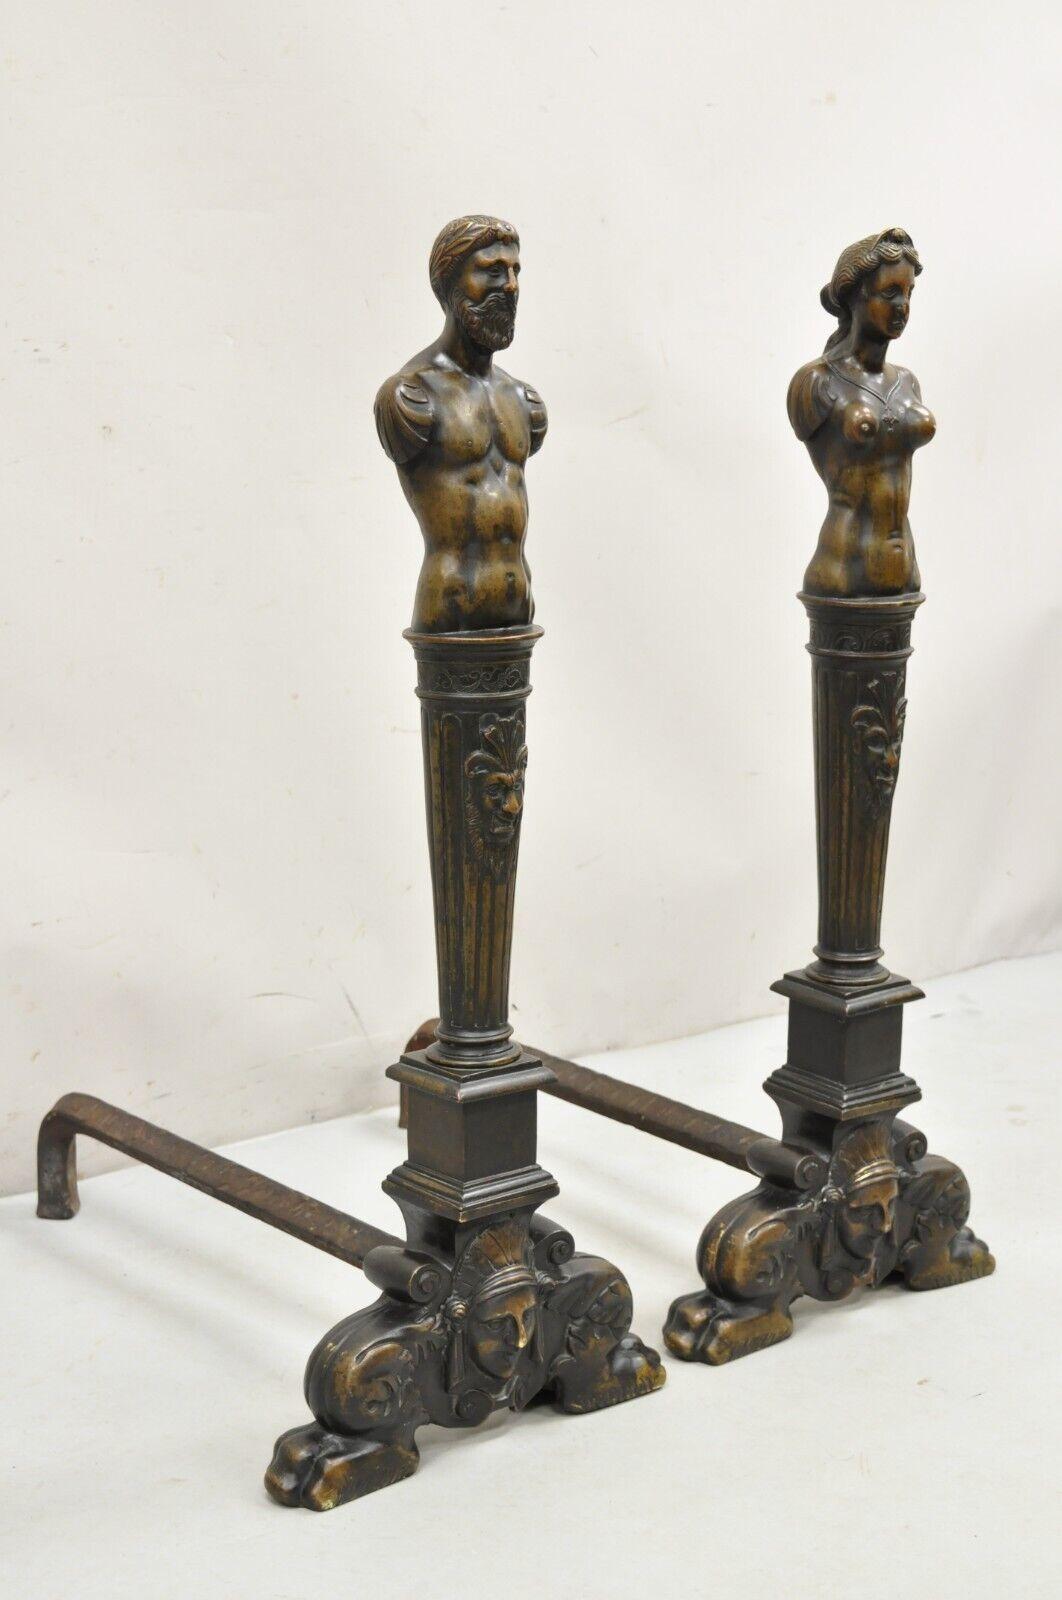 Antique French Renaissance Revival Large Figural Man and Woman Andirons - a Pair. Item featured is a larger impressive size, stunning patina and casting, very rare antique andirons, approx 50 lbs each. Circa 19th Century. Measurements: 35